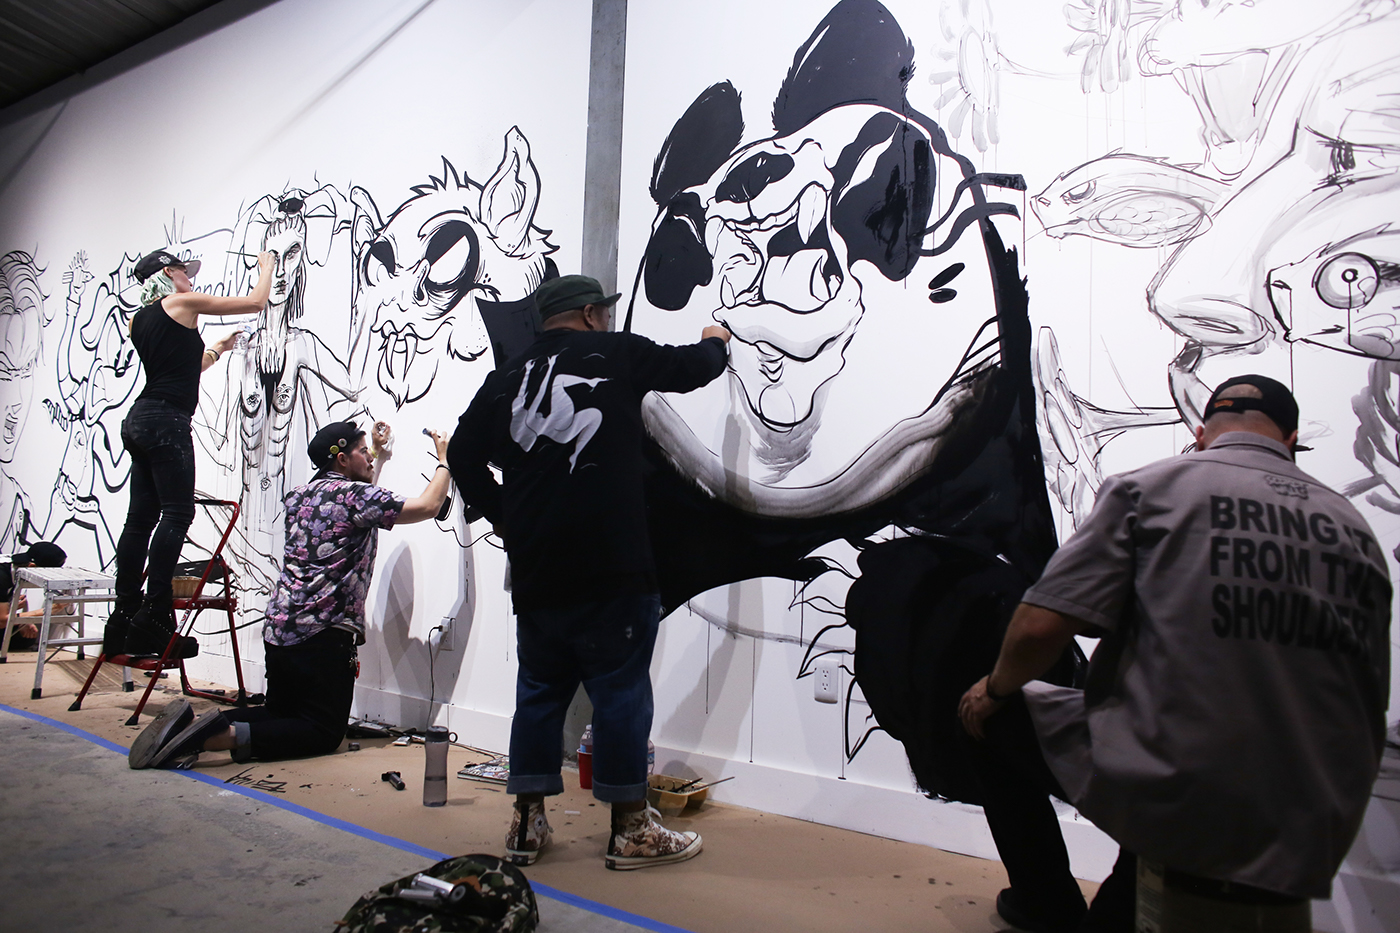 ink black and white doodles freestyle characters graff Graffiti secret walls Marker paint